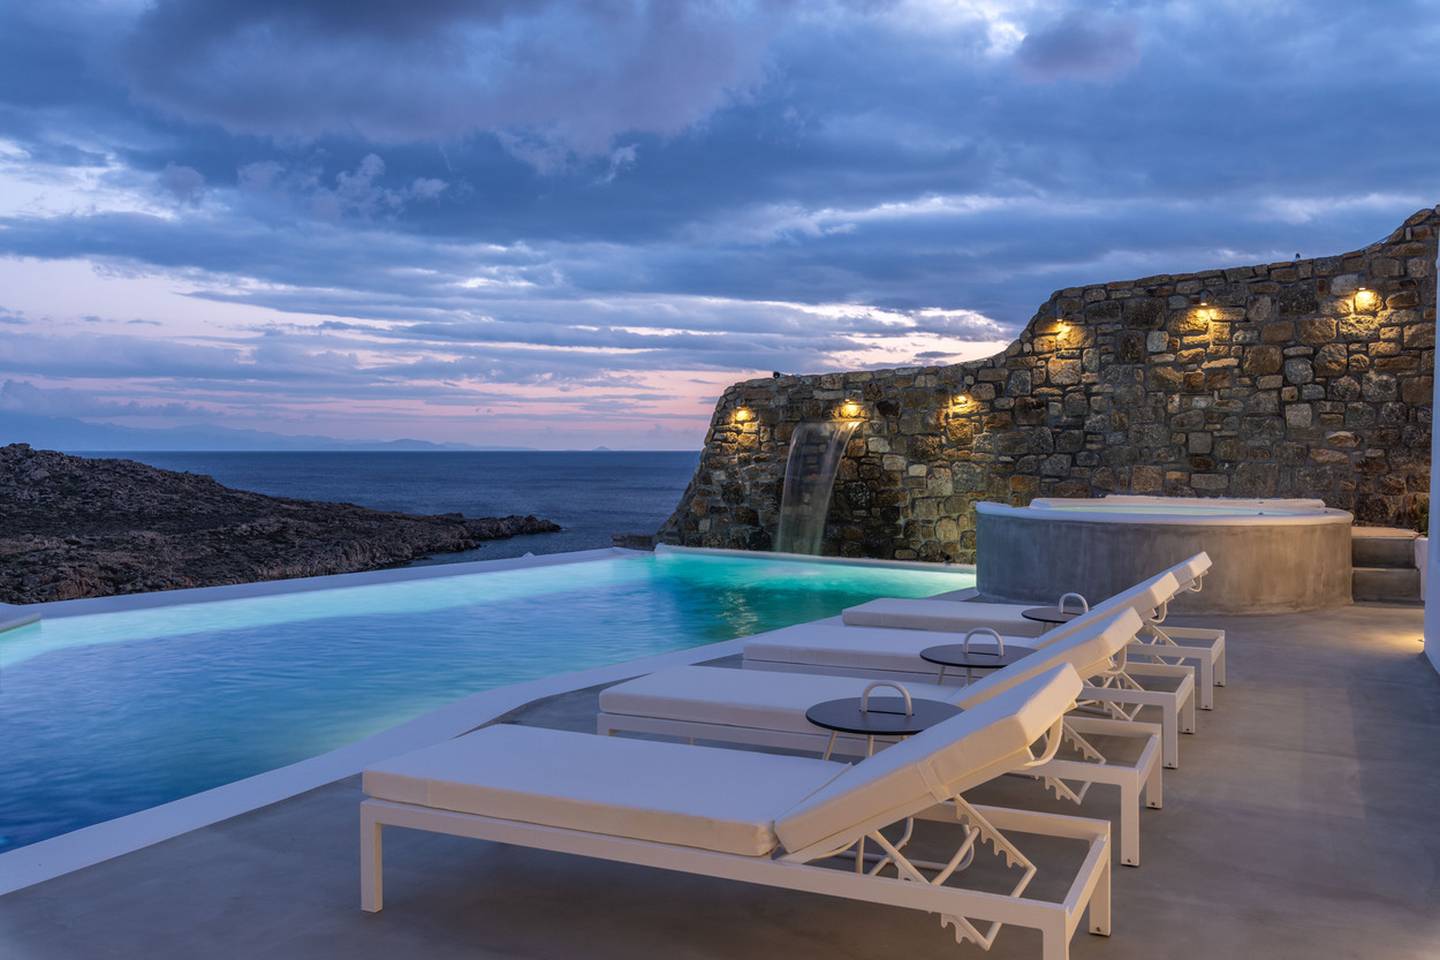 Mountain and sea views from the pool at dusk. Courtesy Engel and Voelkers